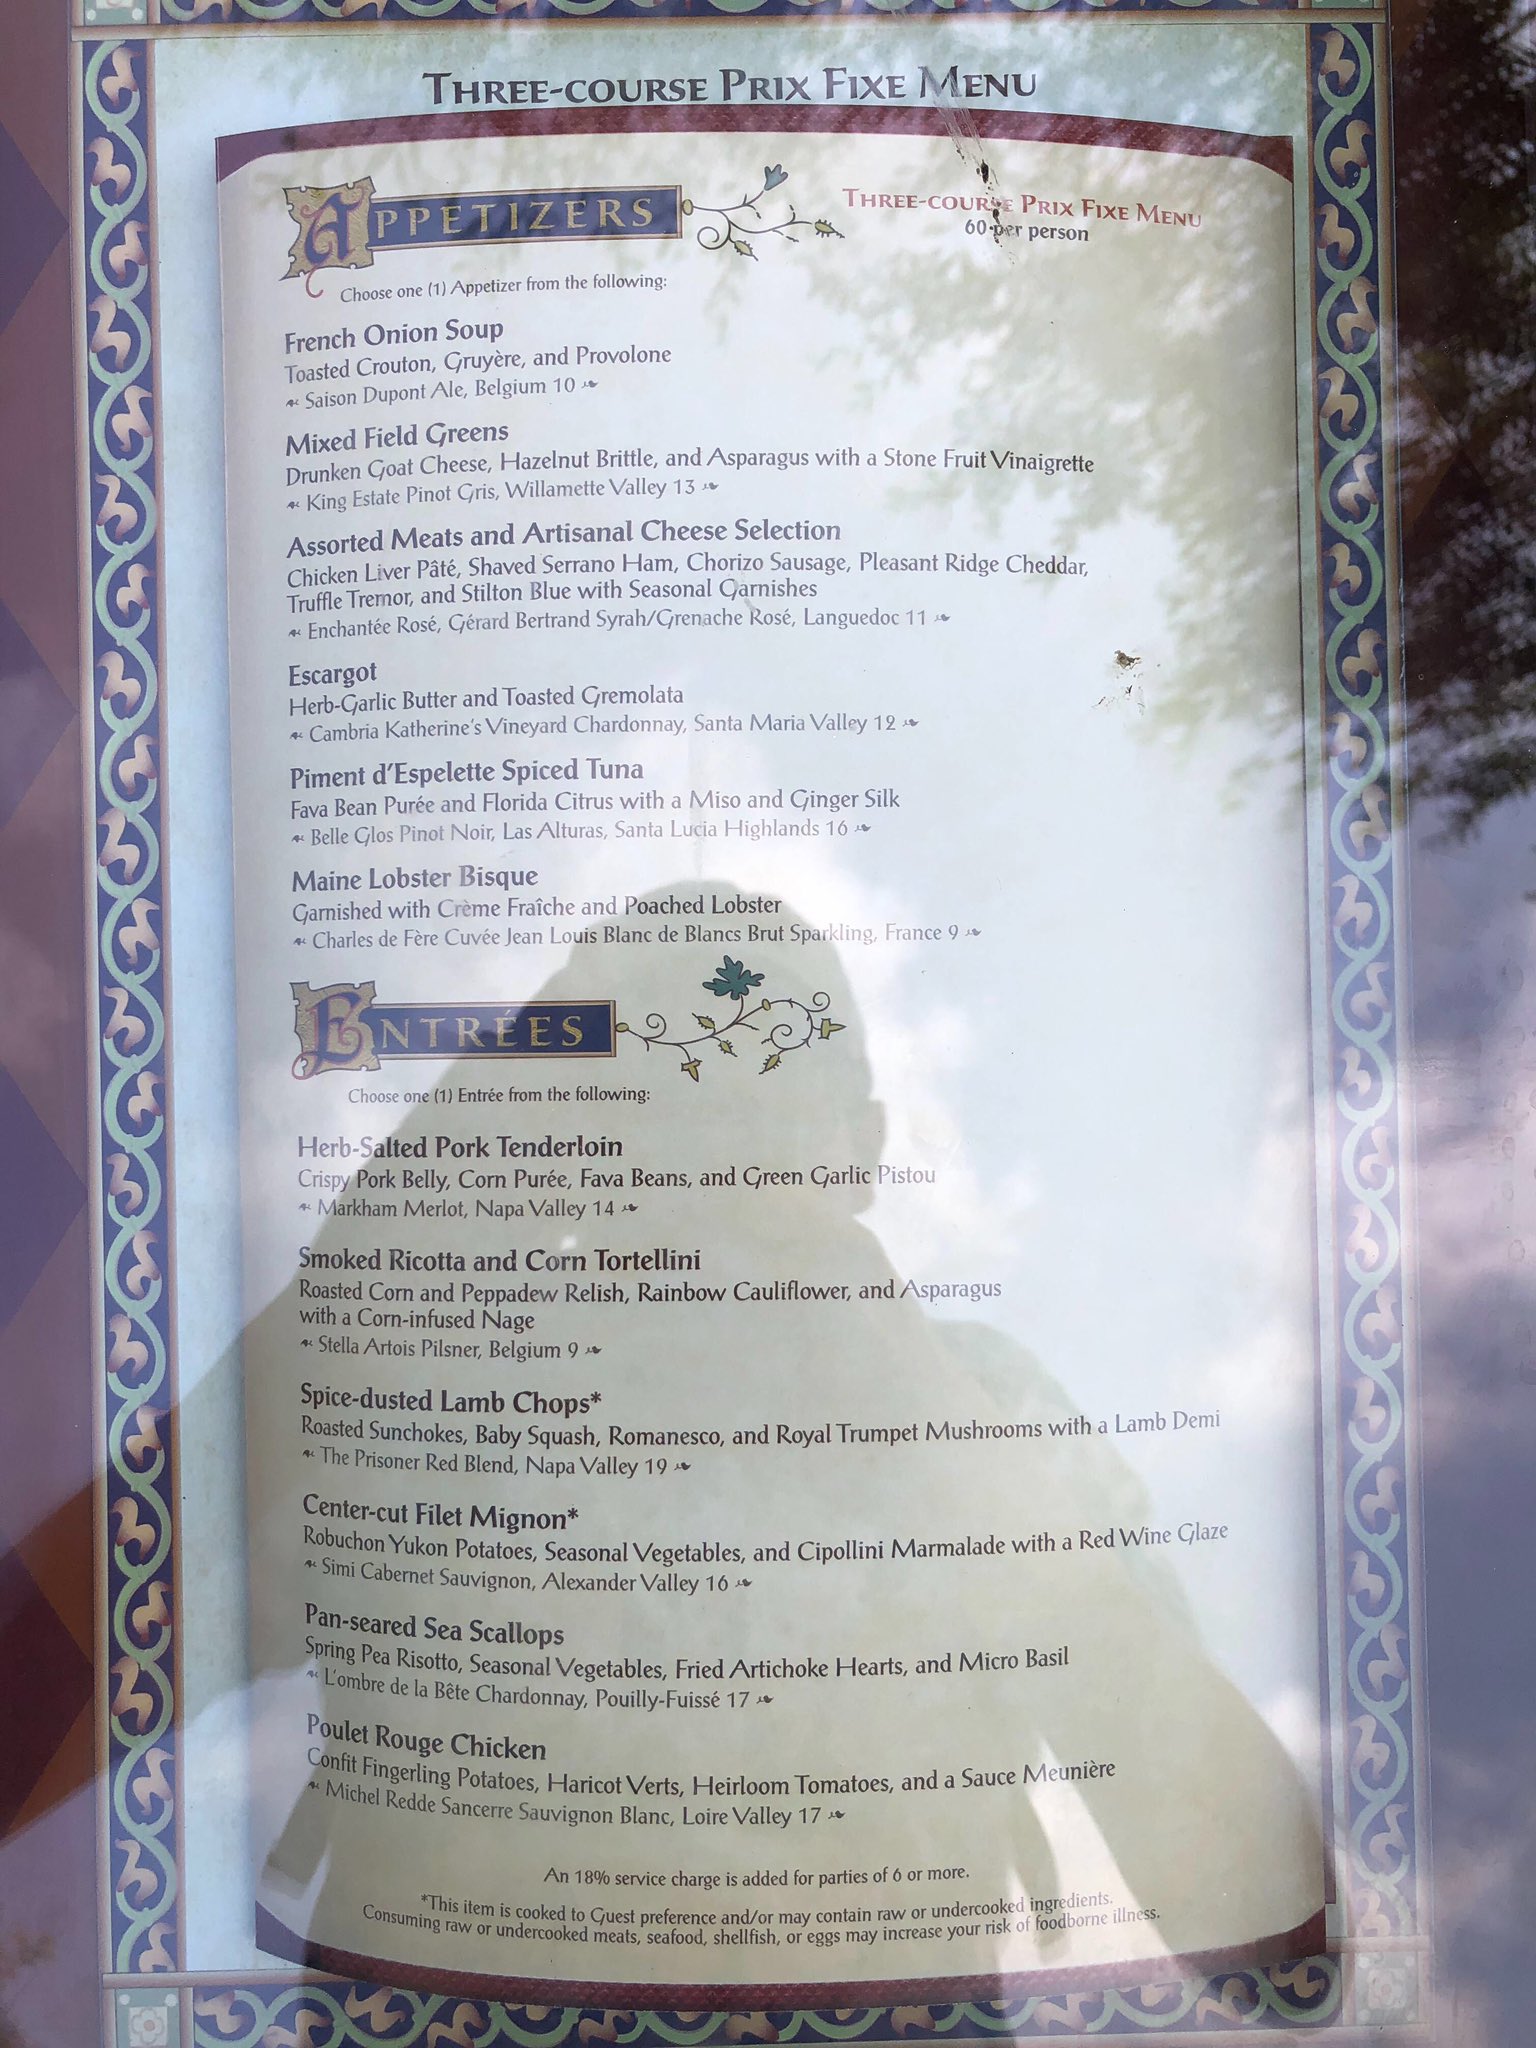 Wdw News Today Menu Updates For Dinner At Be Our Guest Restaurant At The Magic Kingdom New Spiced Tuna Appetizer And Sea Scallops Replace The Gross Bouillabaisse Entree T Co 7pkxofafcy